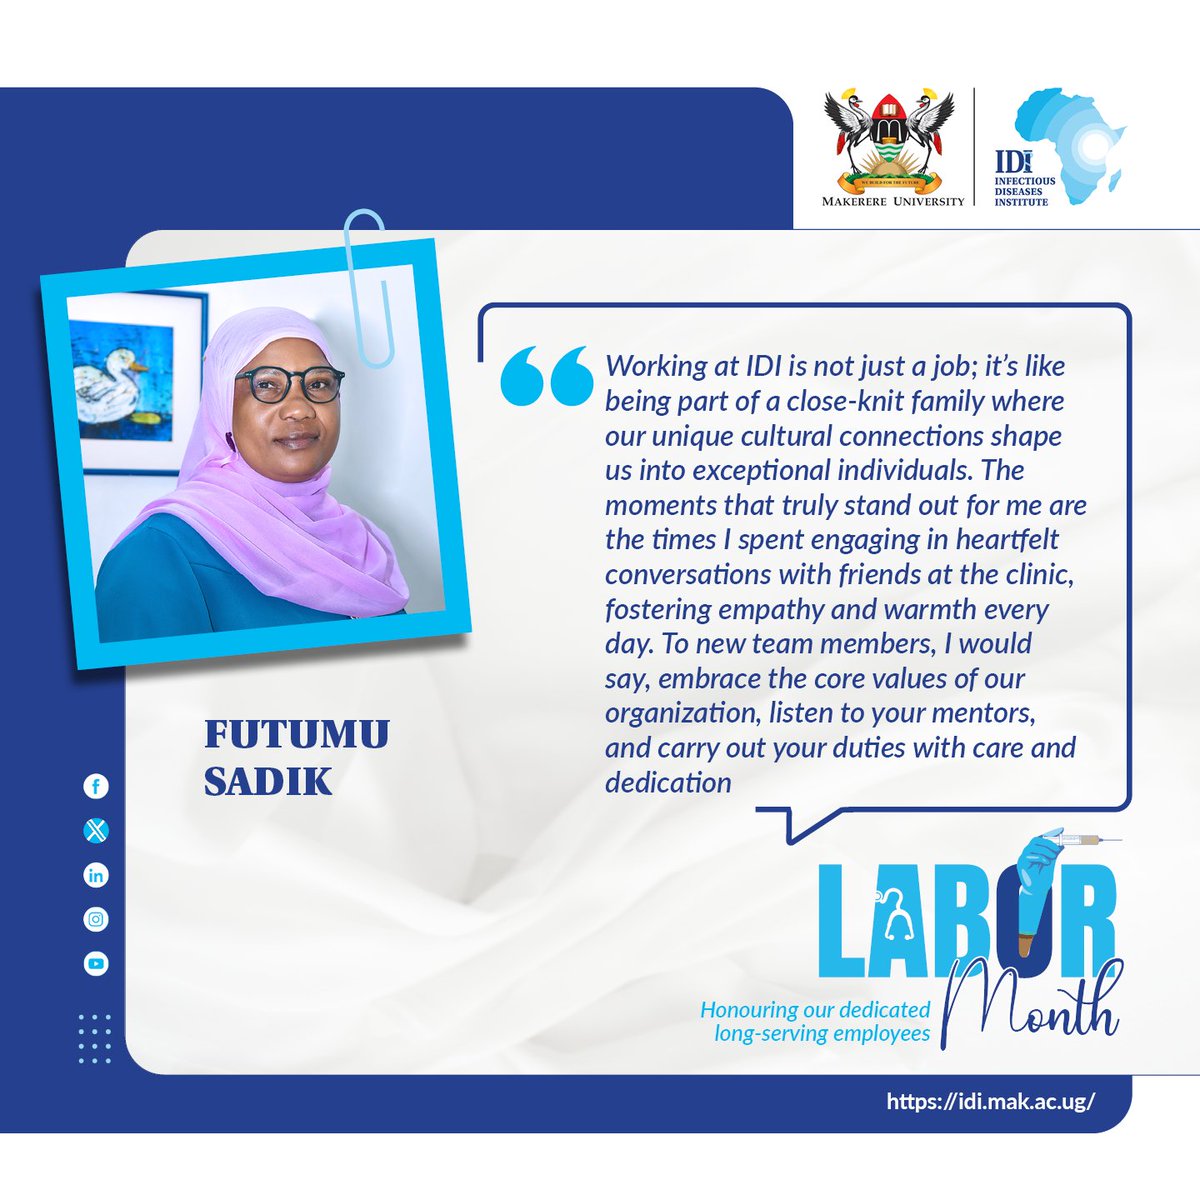 Futumu Sadik isn't only an embodiment of excellence but also a force that has witnessed counselling services at @IDIMakerere evolve to support diverse needs. We celebrate her legacy of distinction that has set the bar high and inspired us all.